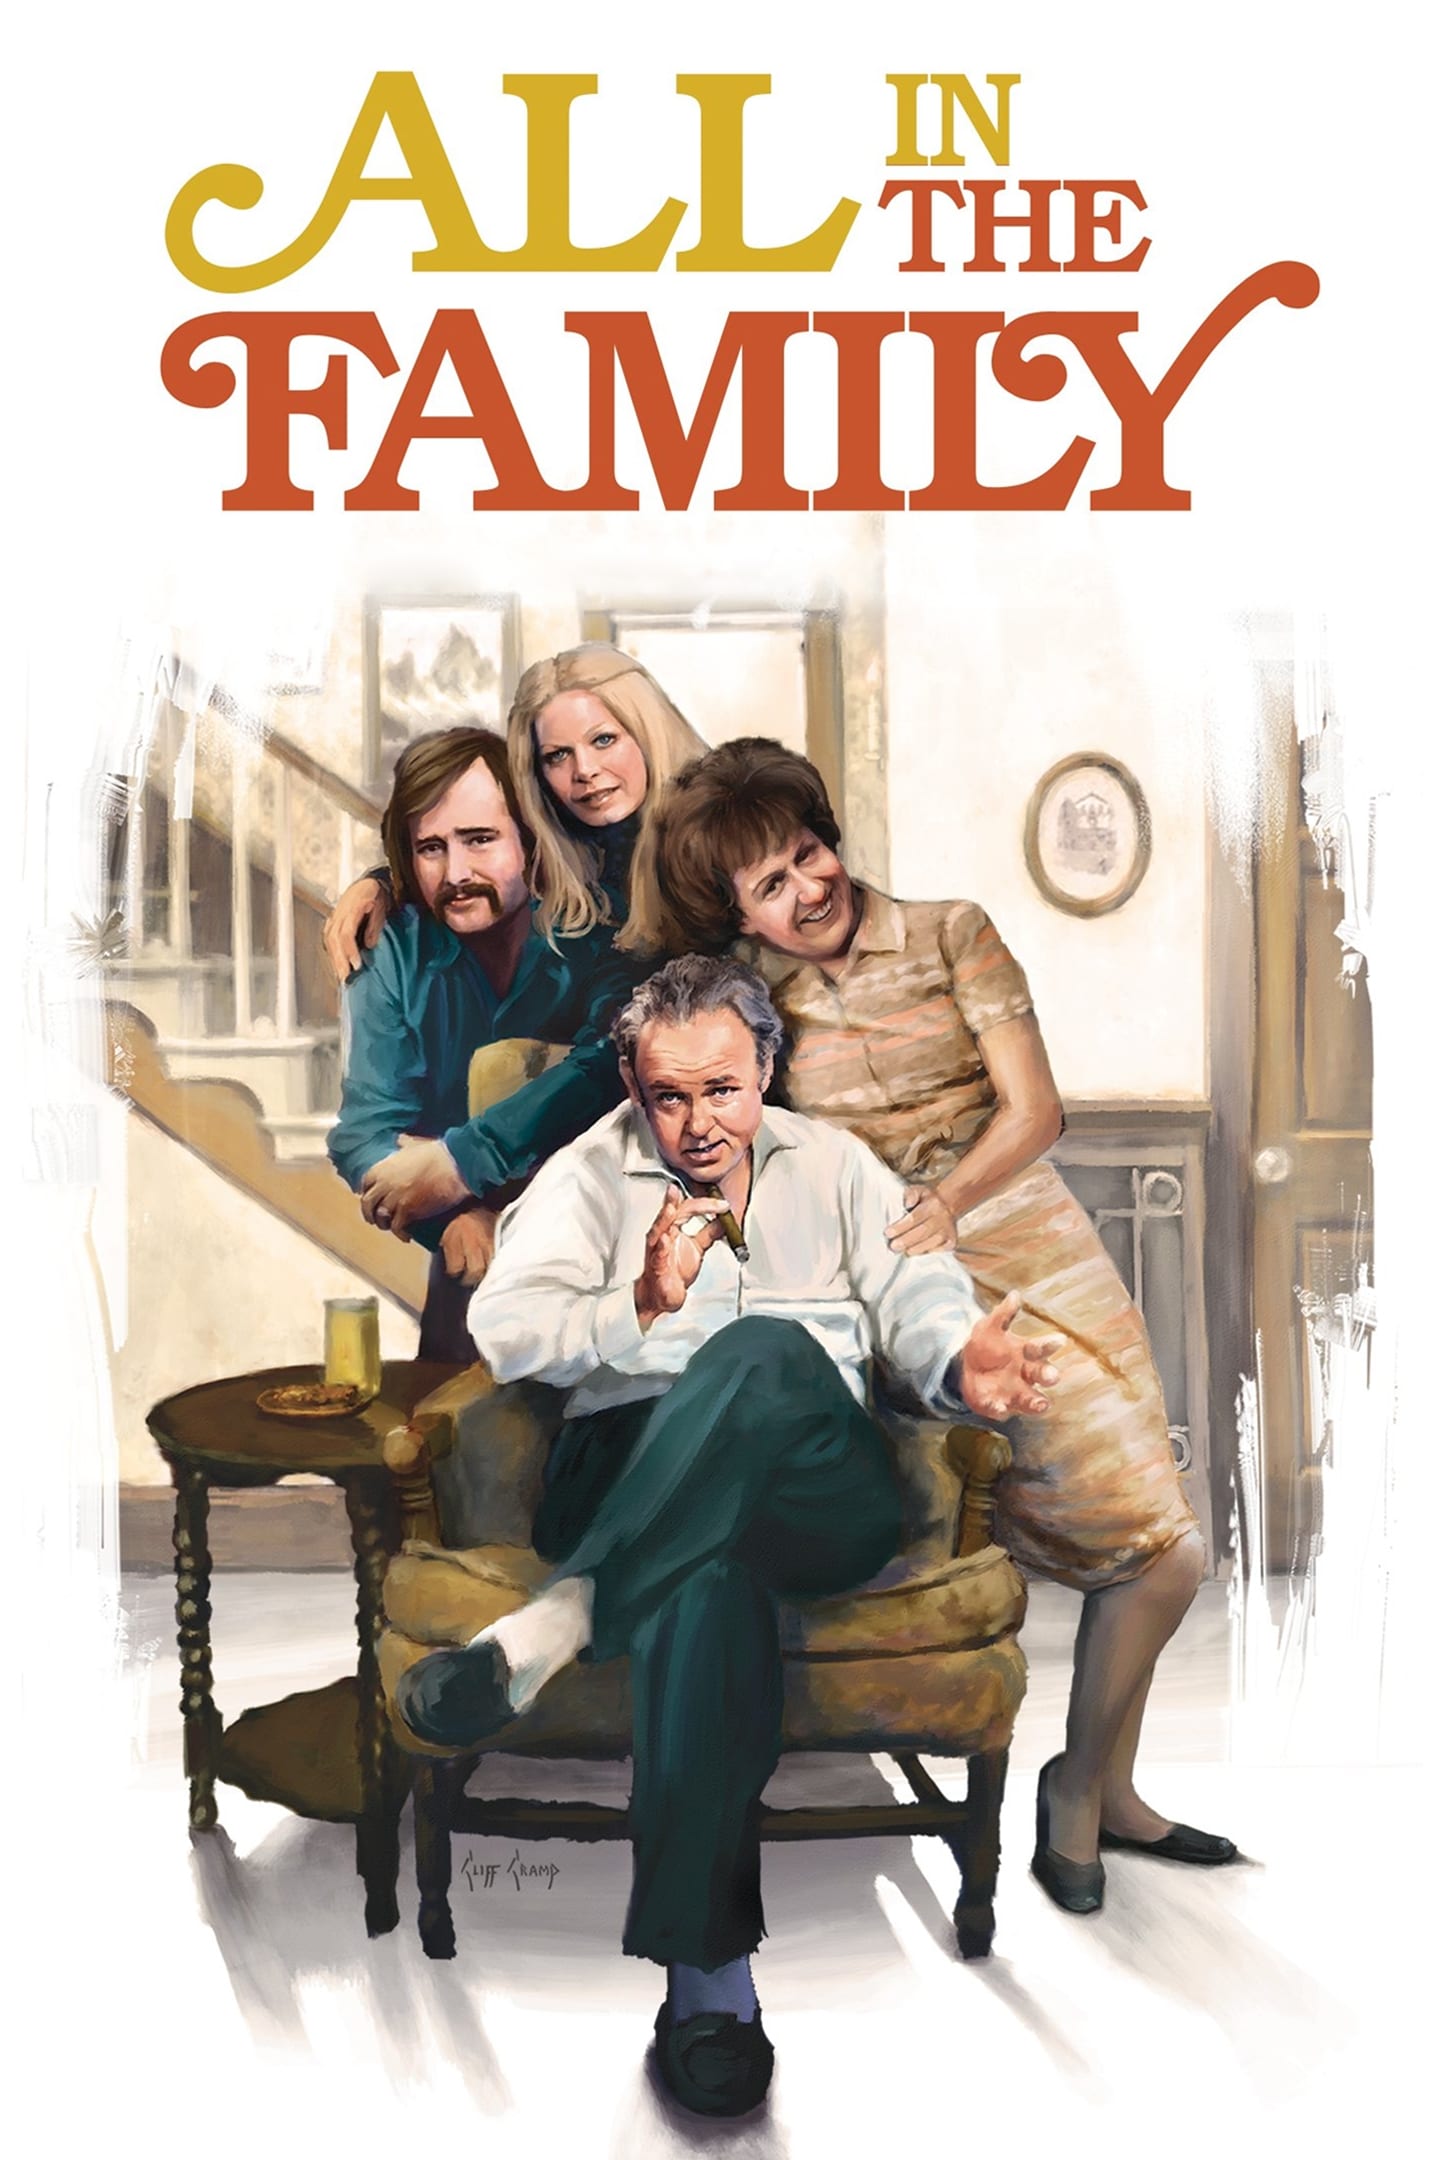 All in the Family (1971)